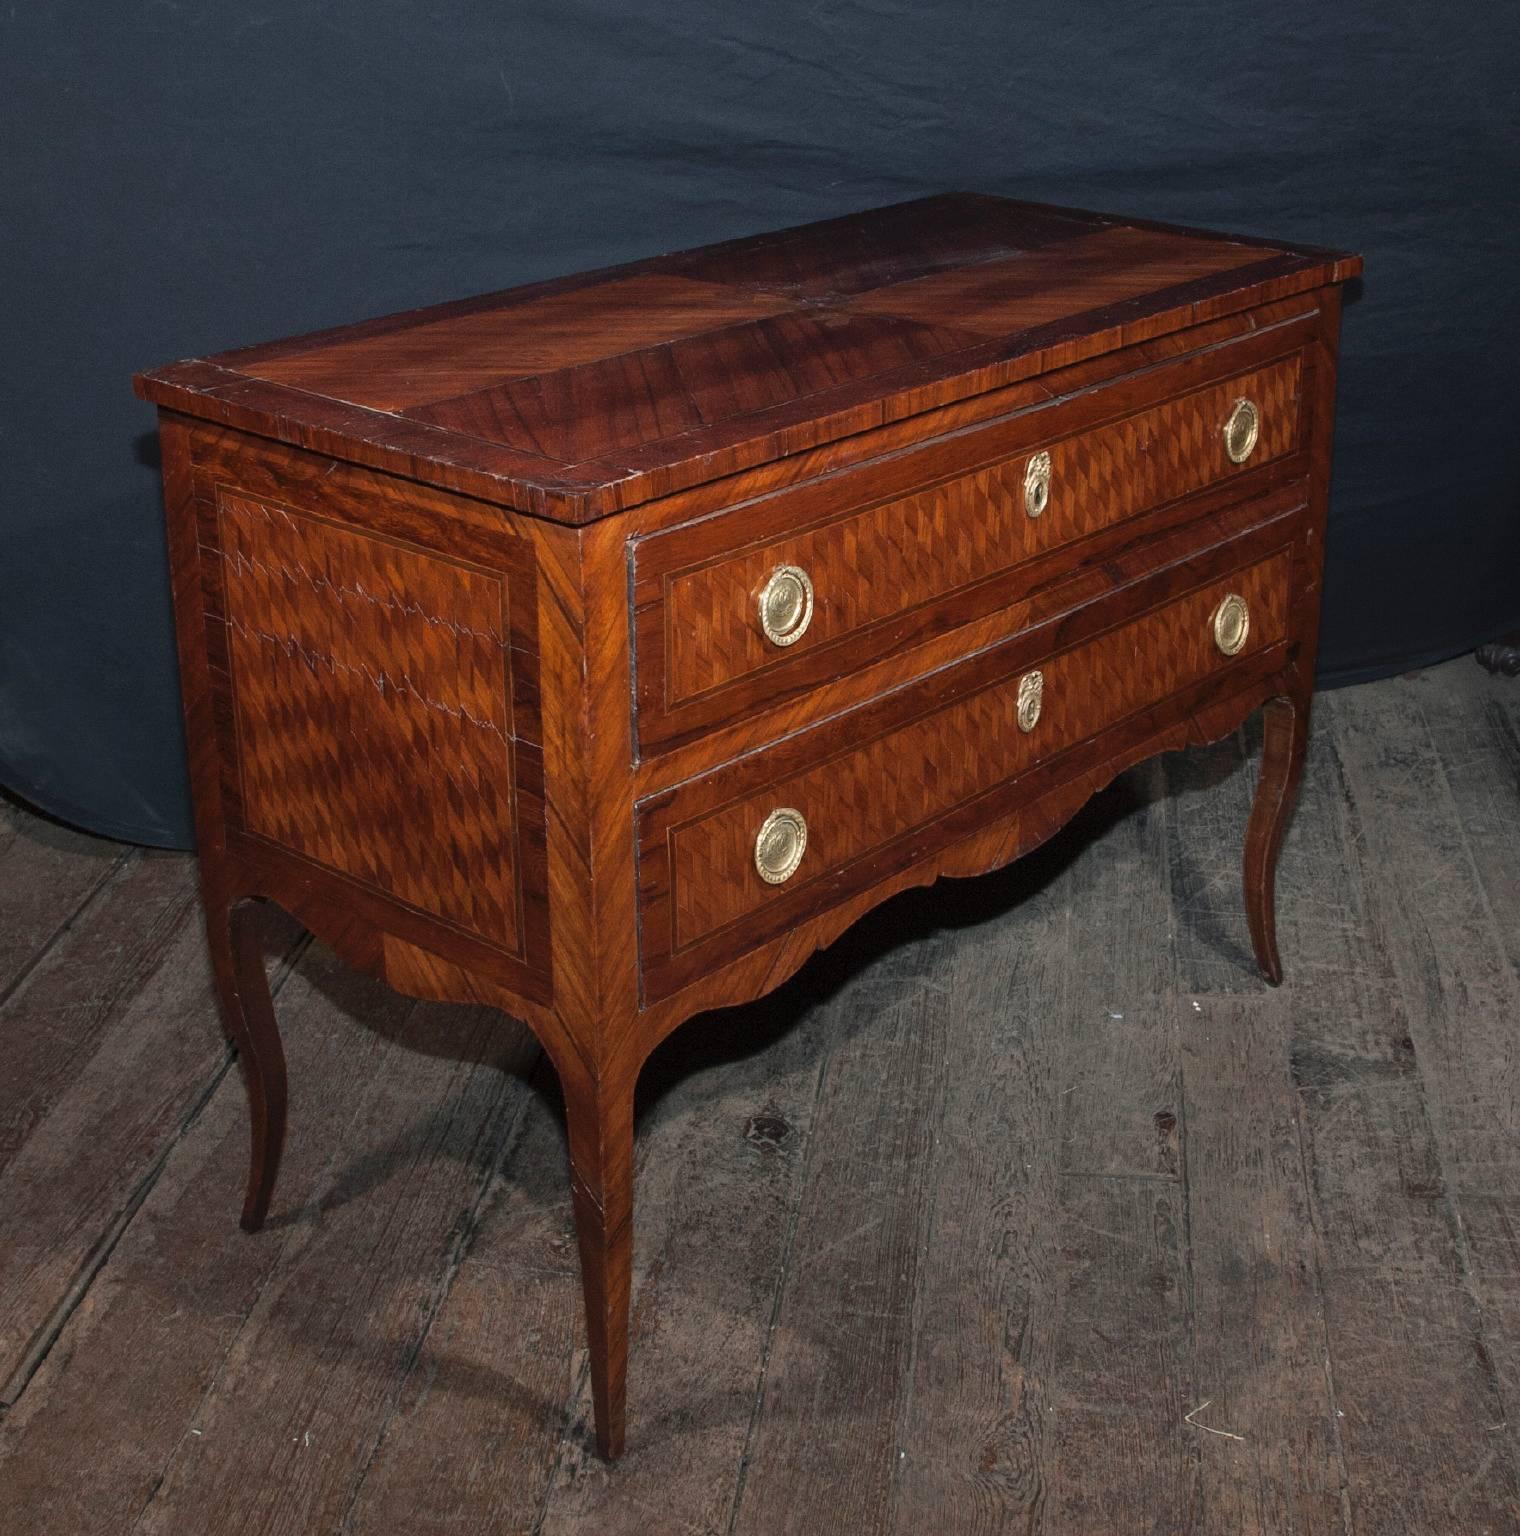 This chest is a two-drawer marquetry chest made in 19th century, France. The marquetry work on this chest is truly magnificent. Additionally, the hardware on the chest features naval ships in the center.